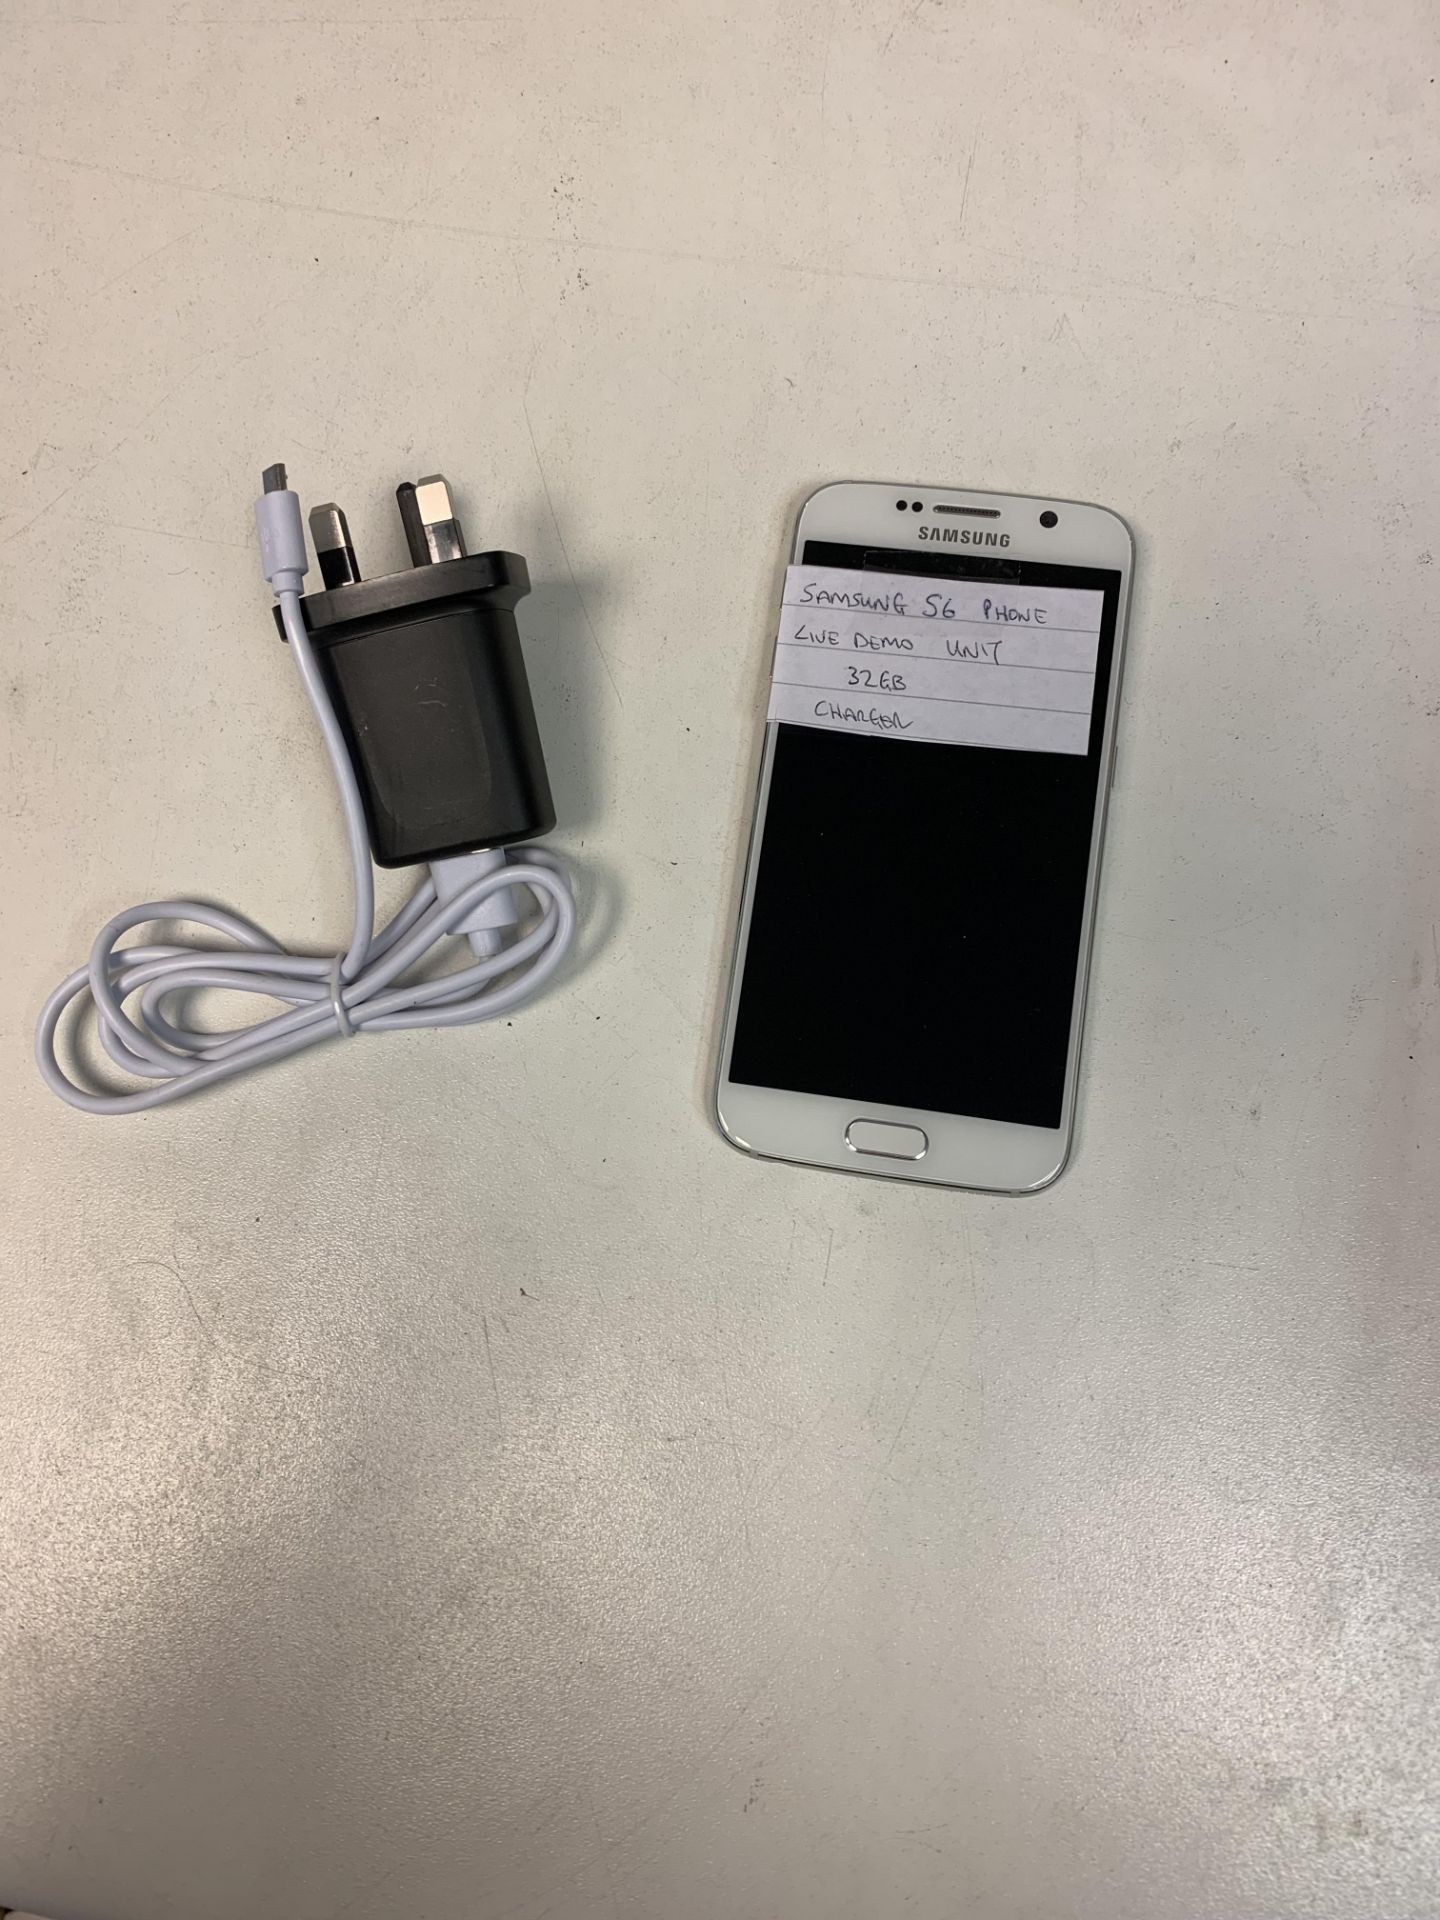 SAMSUNG S6 PHONE, LIVE DEMO UNIT 32GB WITH CHARGER